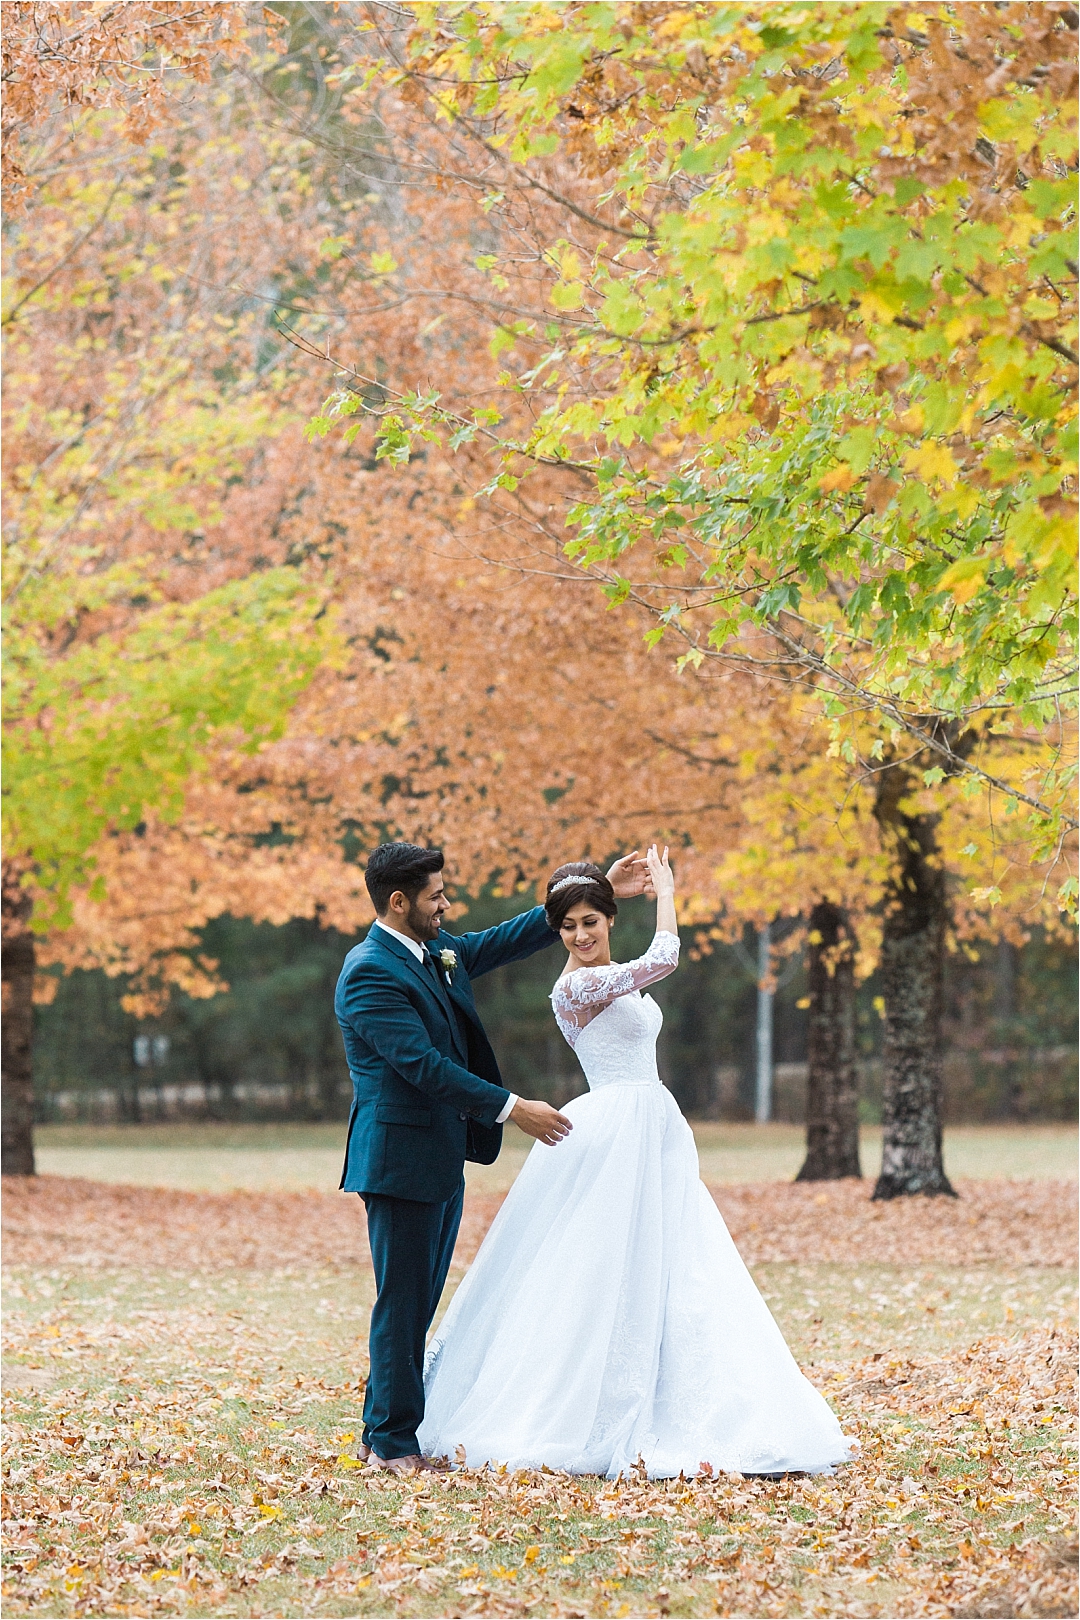 groom spinning bride in fall leaves_Photos by Leigh Wolfe, Atlanta's Top Wedding Photographer